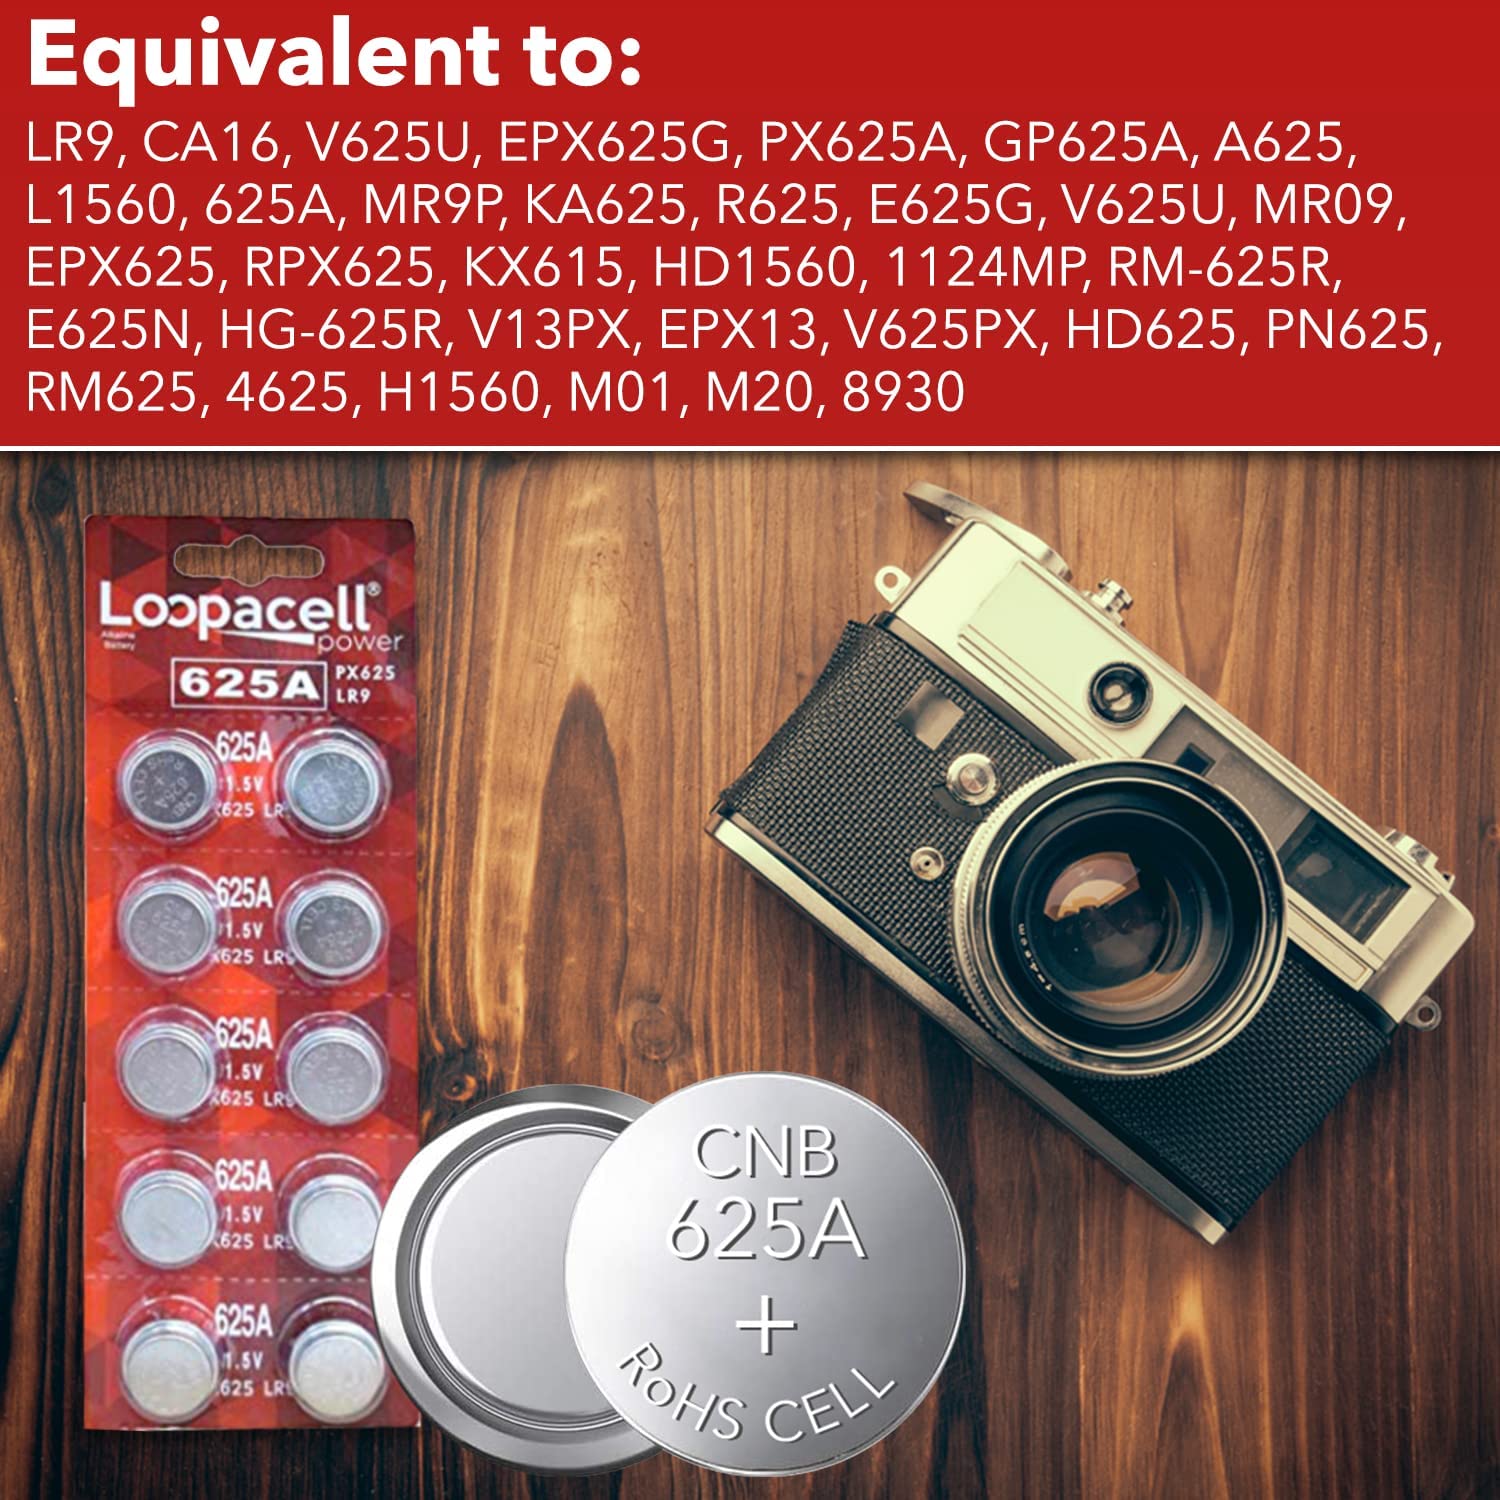 Loopacell 625A PX625A LR9 V625U PX625 1.5V 10 Batteries - image 2 of 6